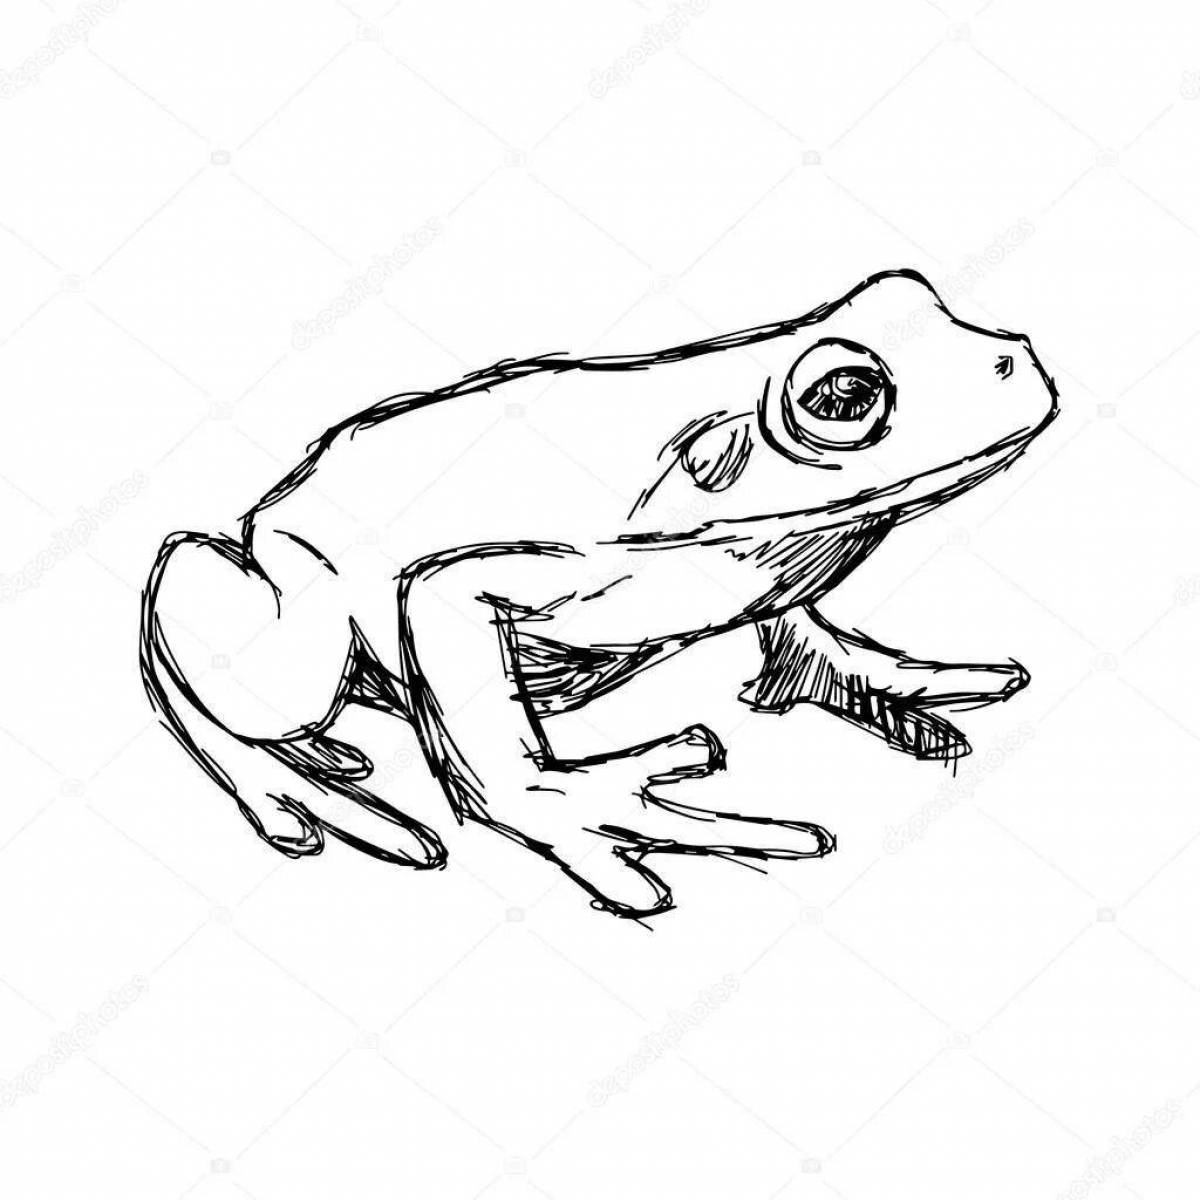 Luminous frog coloring page